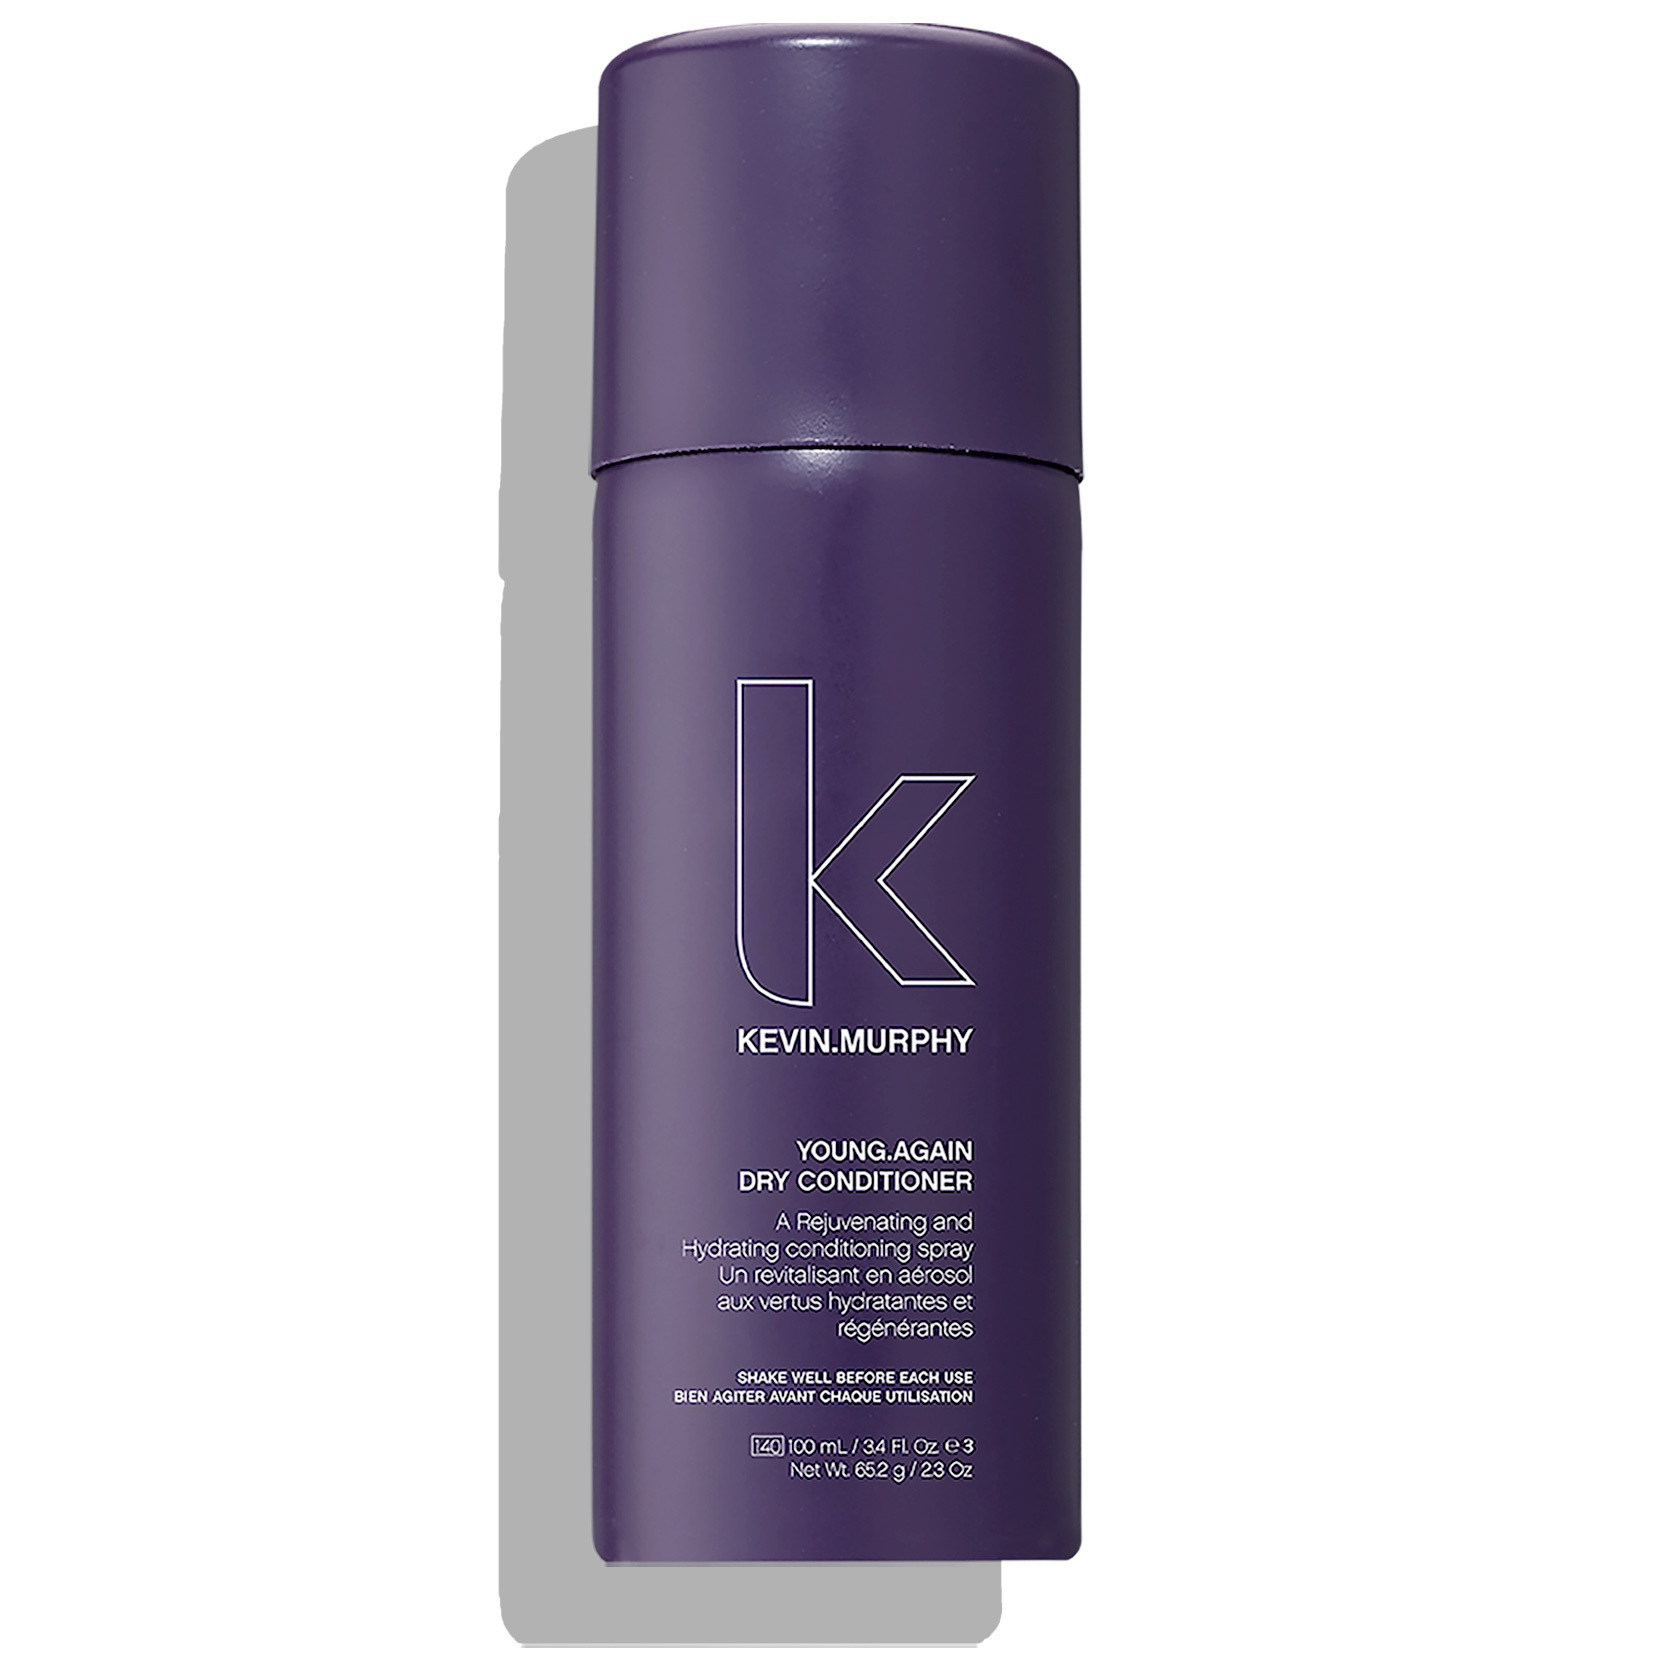 KEVIN.MURPHY YOUNG.AGAIN Dry Conditioner 3.4oz